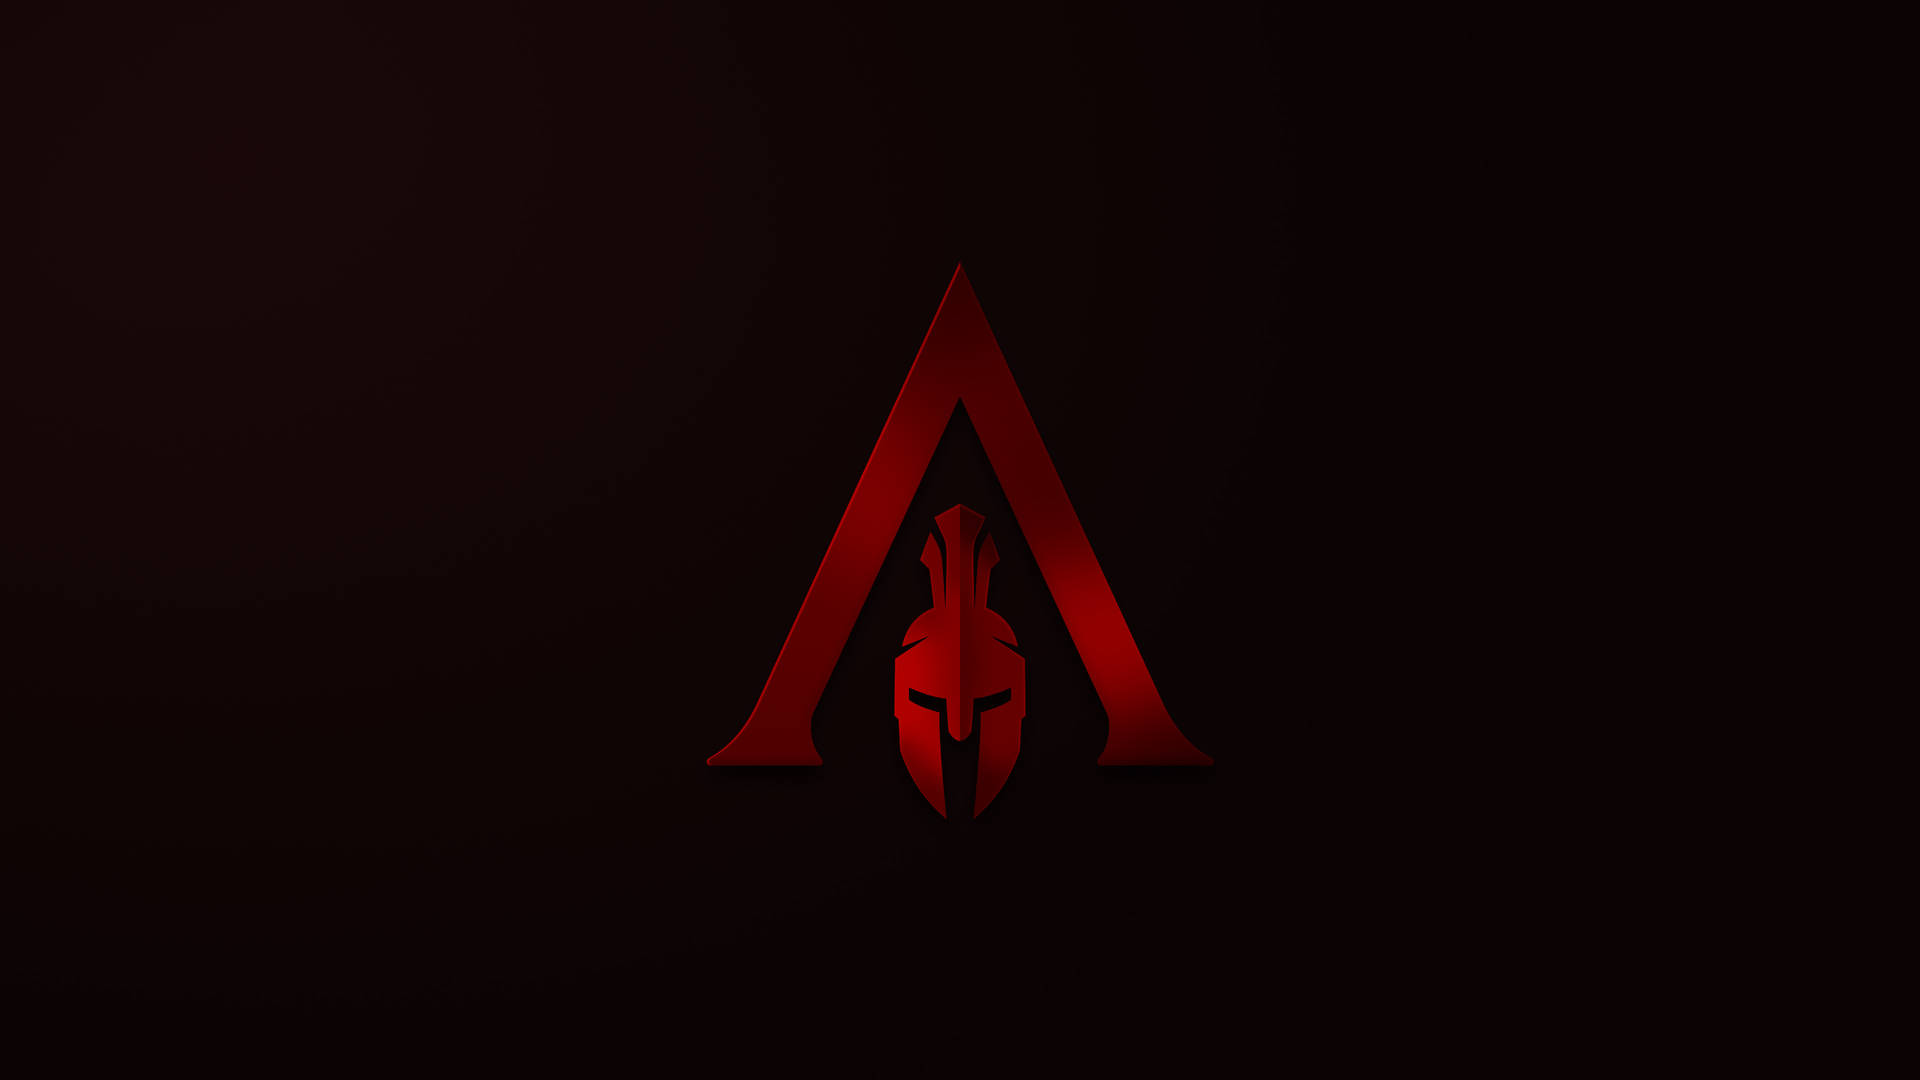 Assassin's Creed Odyssey Aesthetic Game Logo Wallpaper